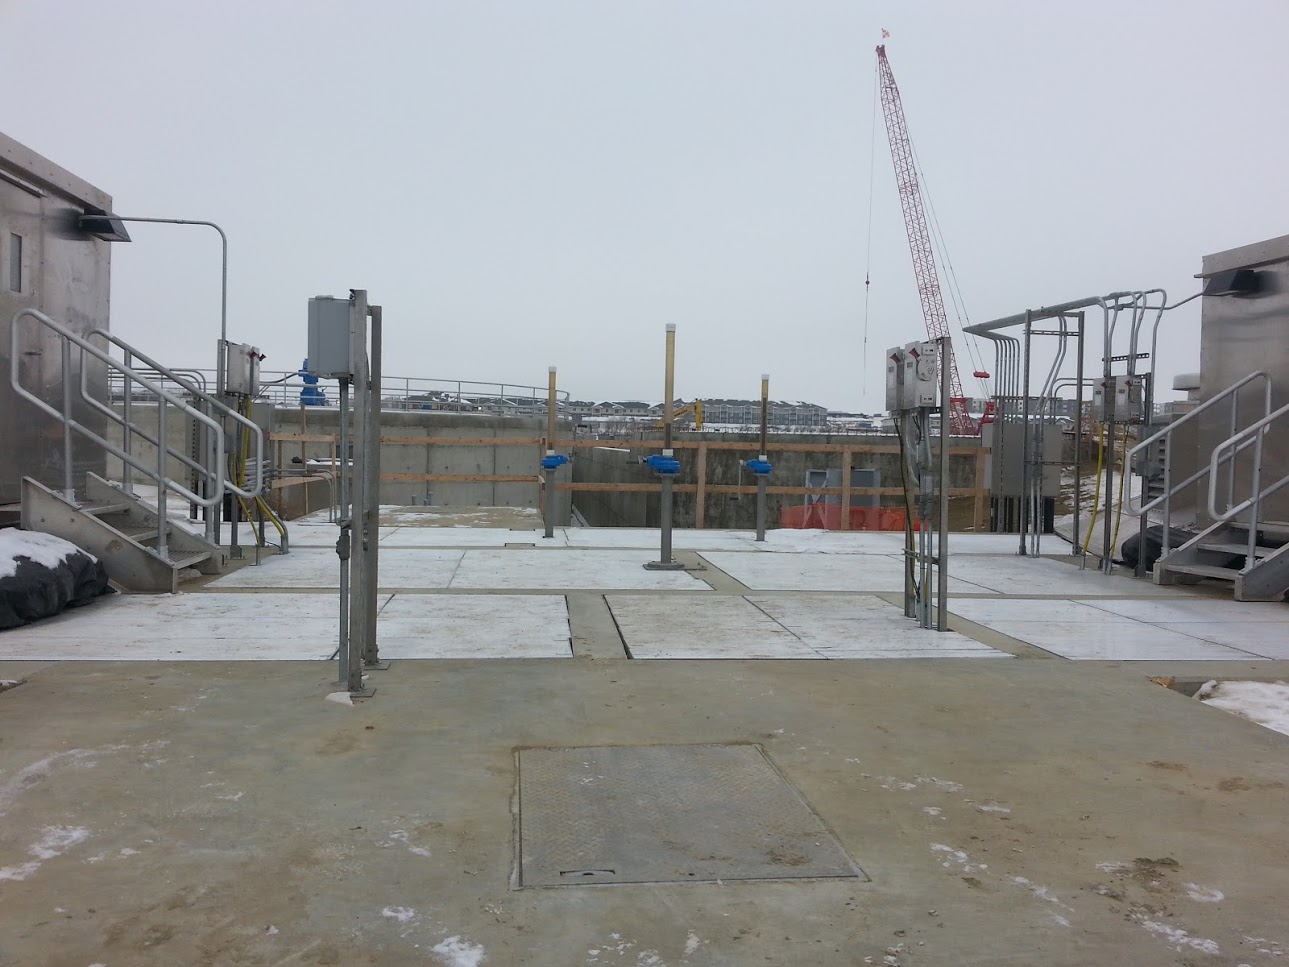 Large metal ground panels on job site with crane in background